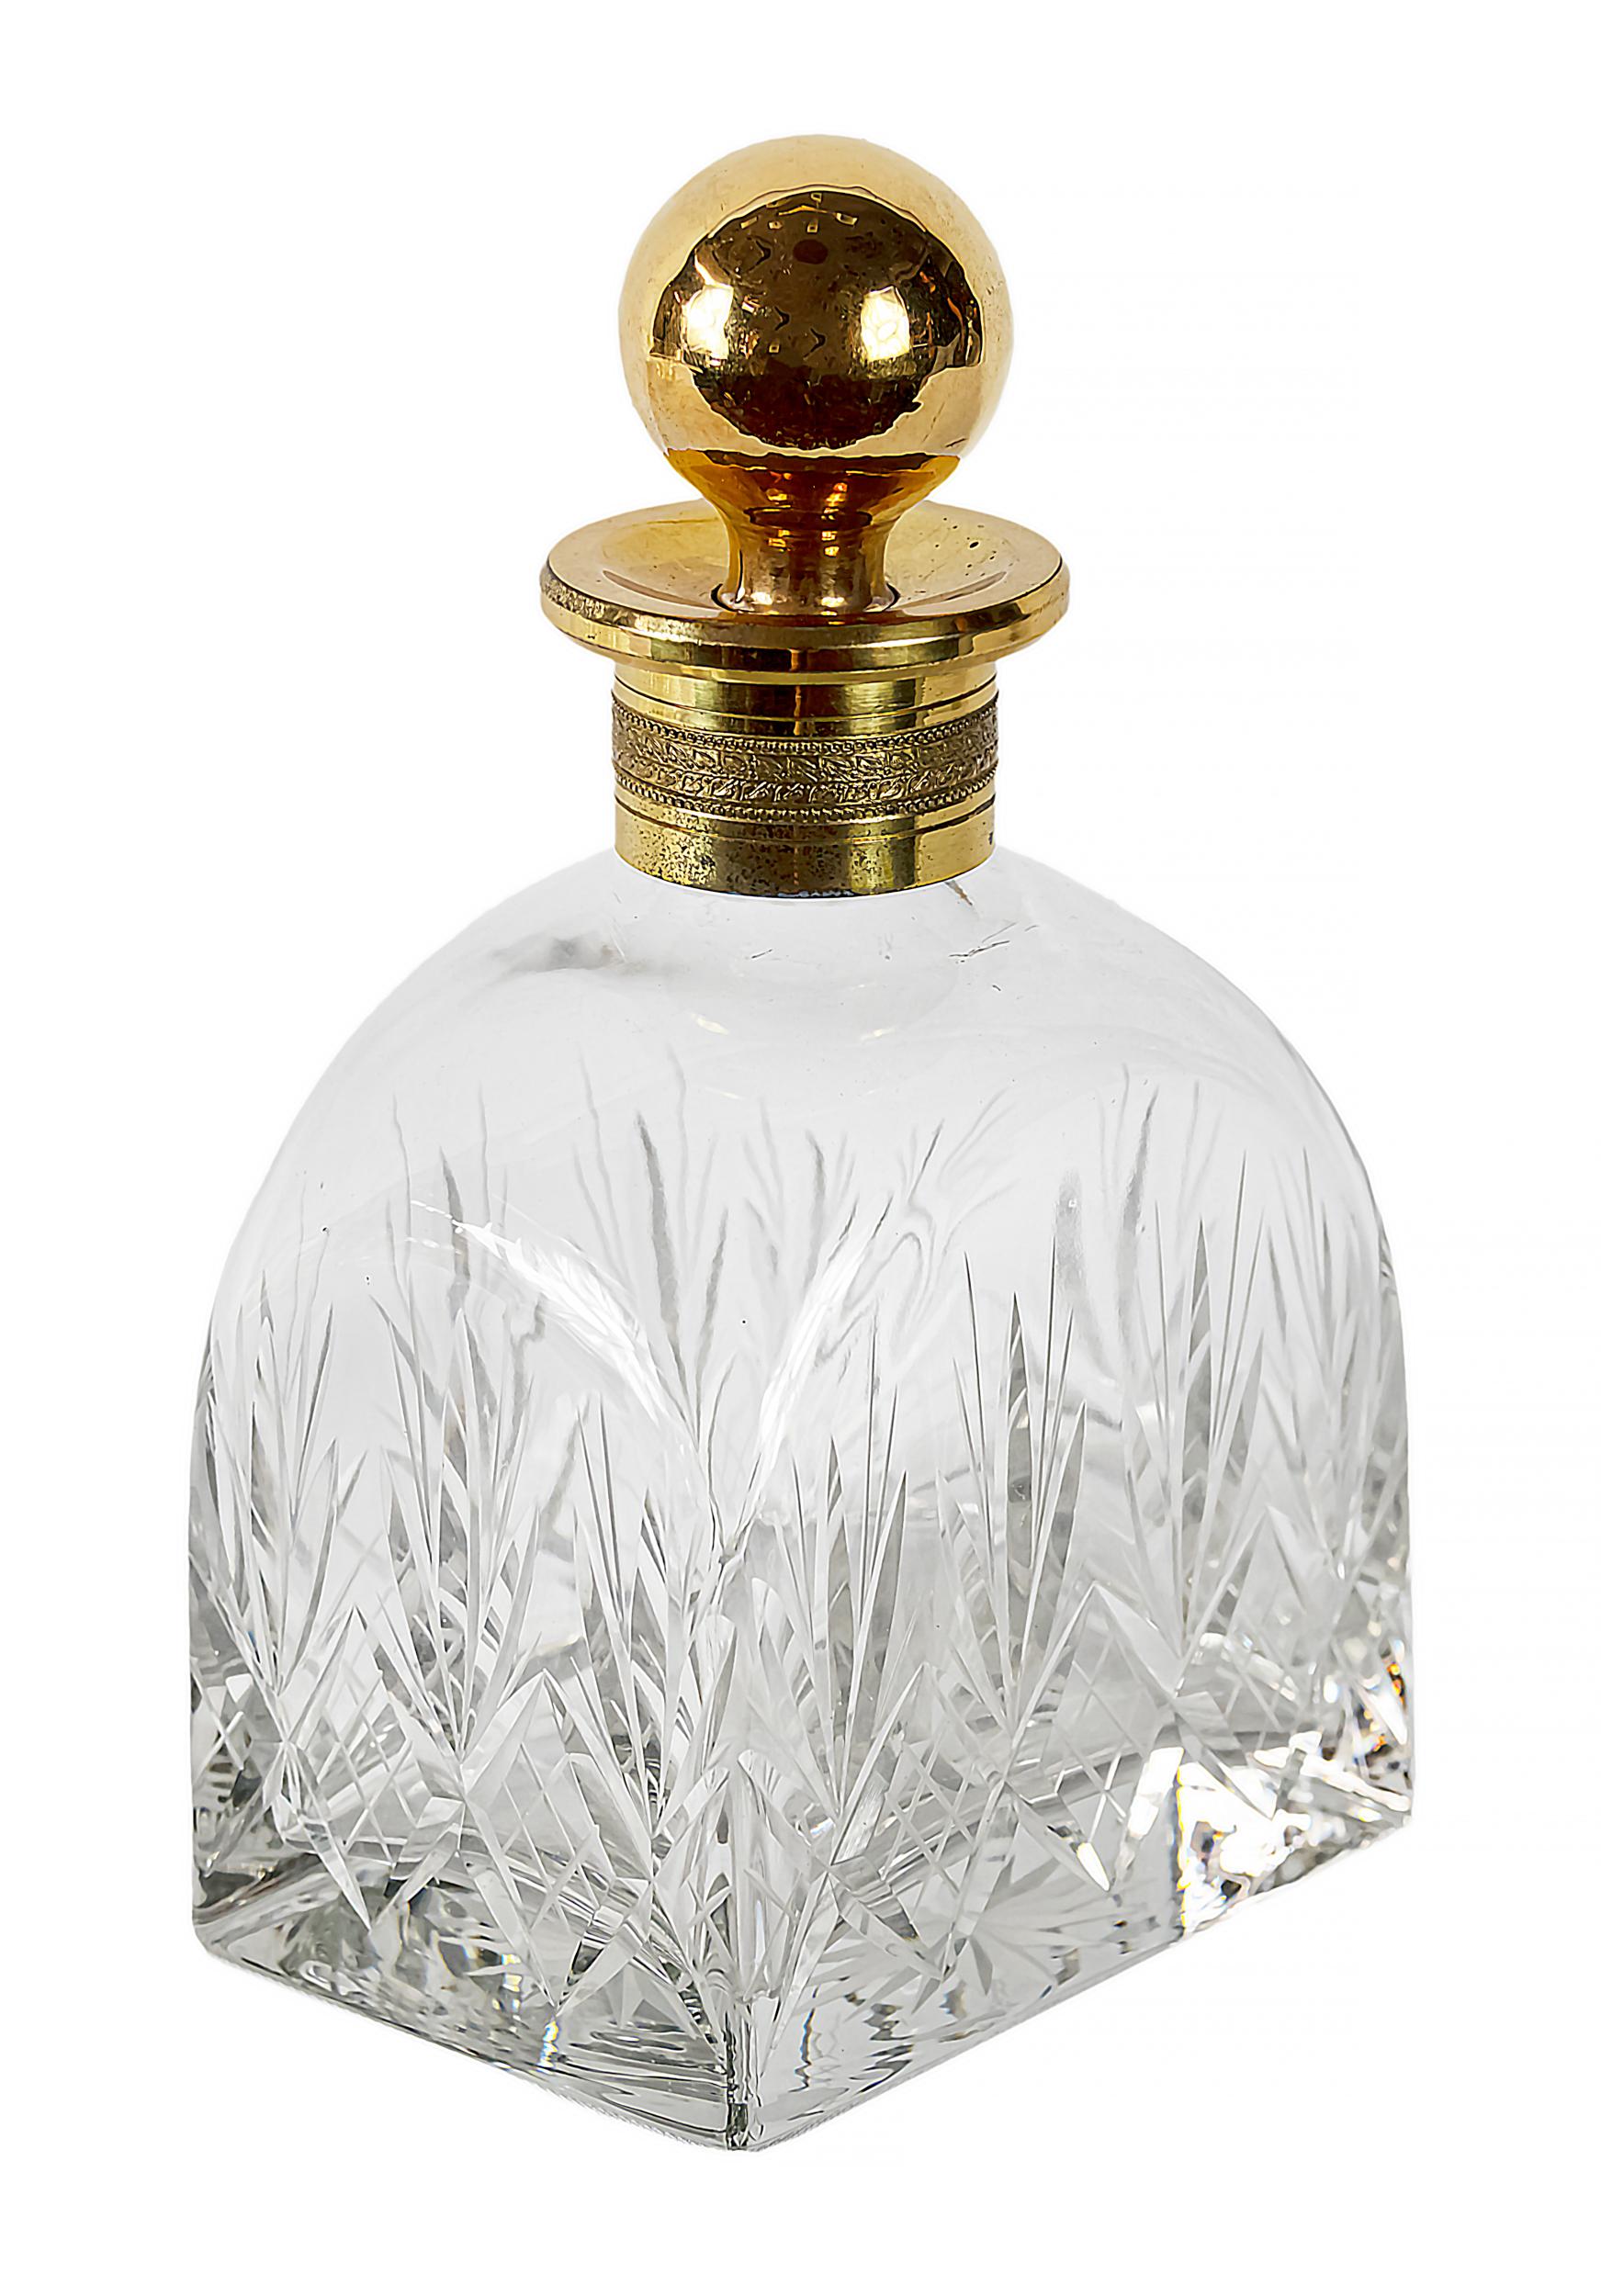 French hand made cut crystal whiskey decanter mounted with gilt bronze and gilt stopper.
Very good/excellent condition.